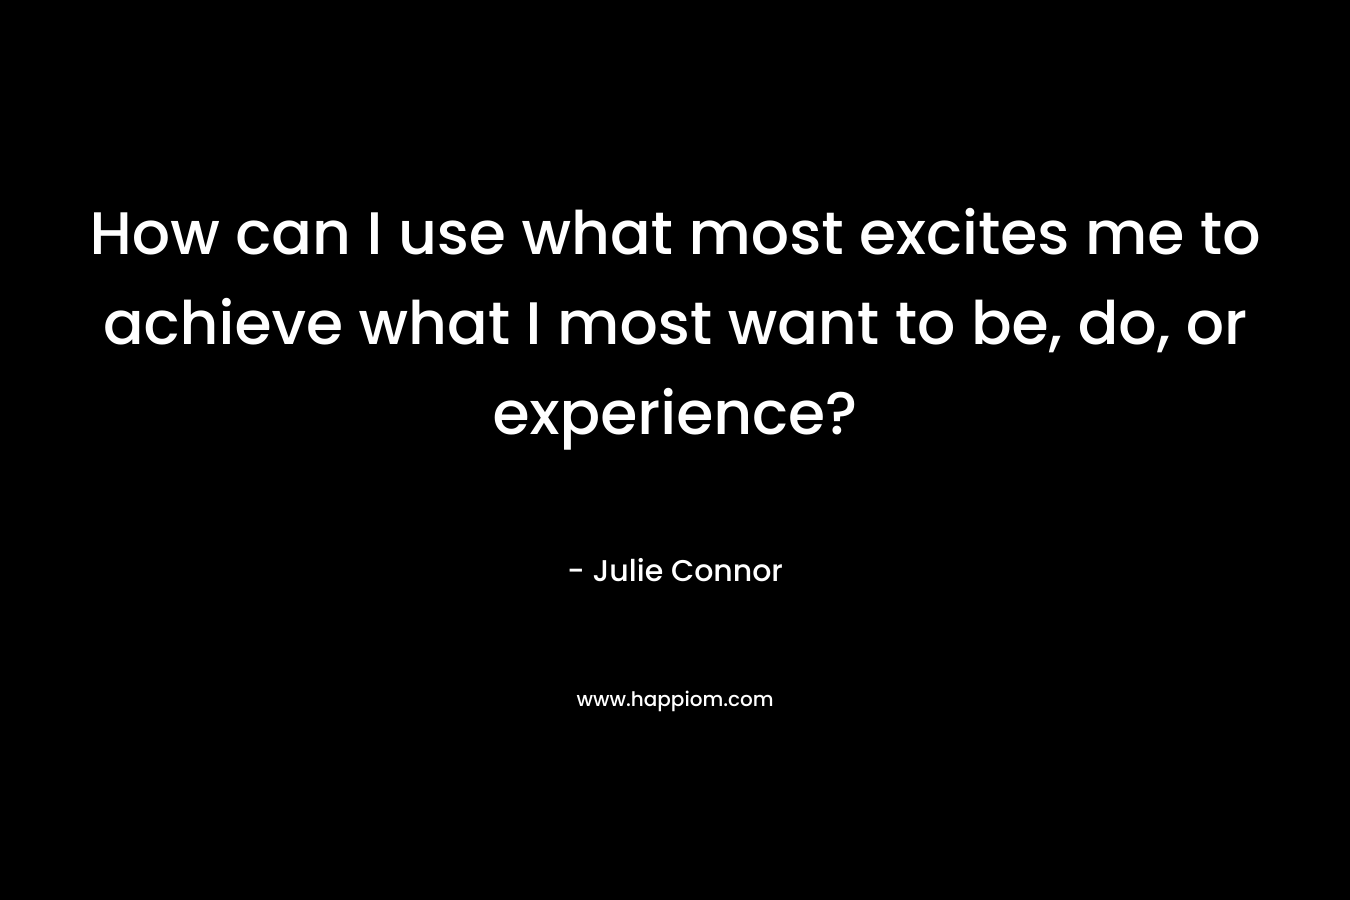 How can I use what most excites me to achieve what I most want to be, do, or experience? – Julie Connor